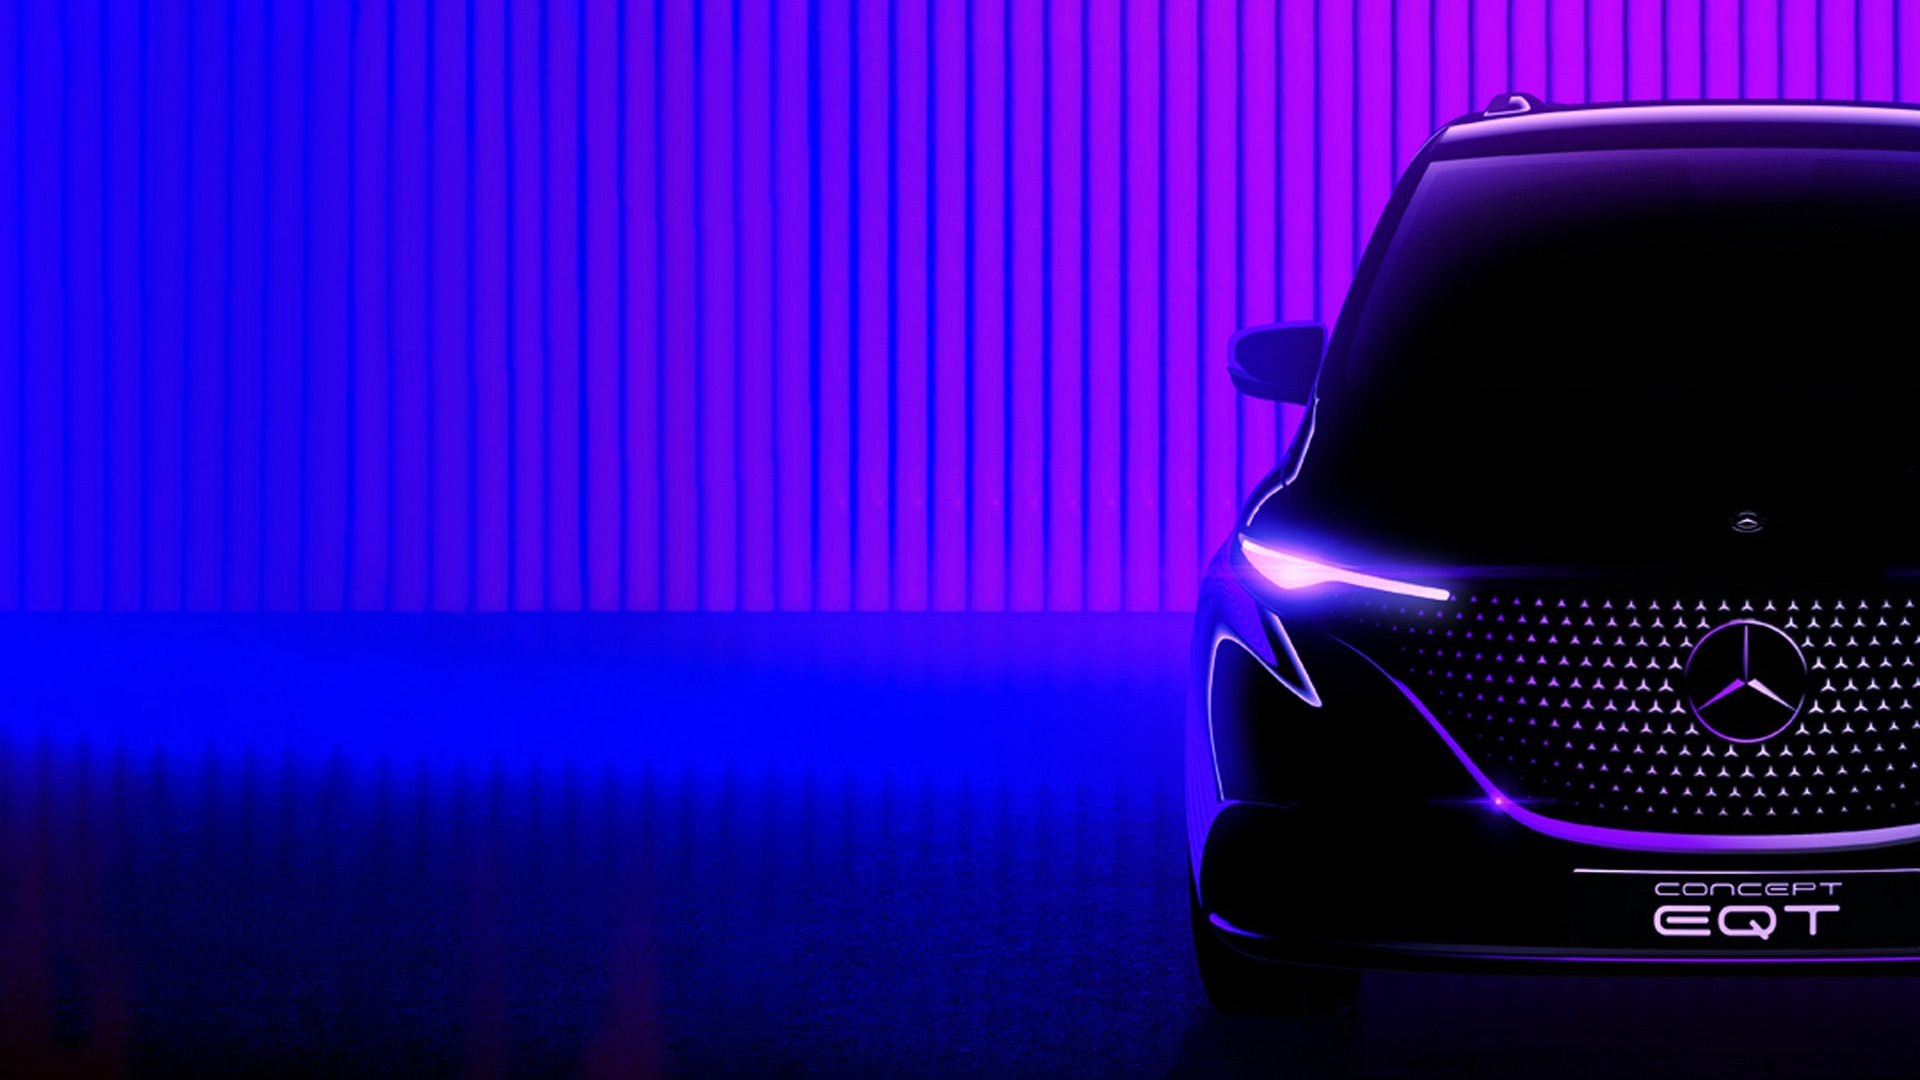 Teaser for Mercedes-Benz Concept EQT debuting on May 10, 2021